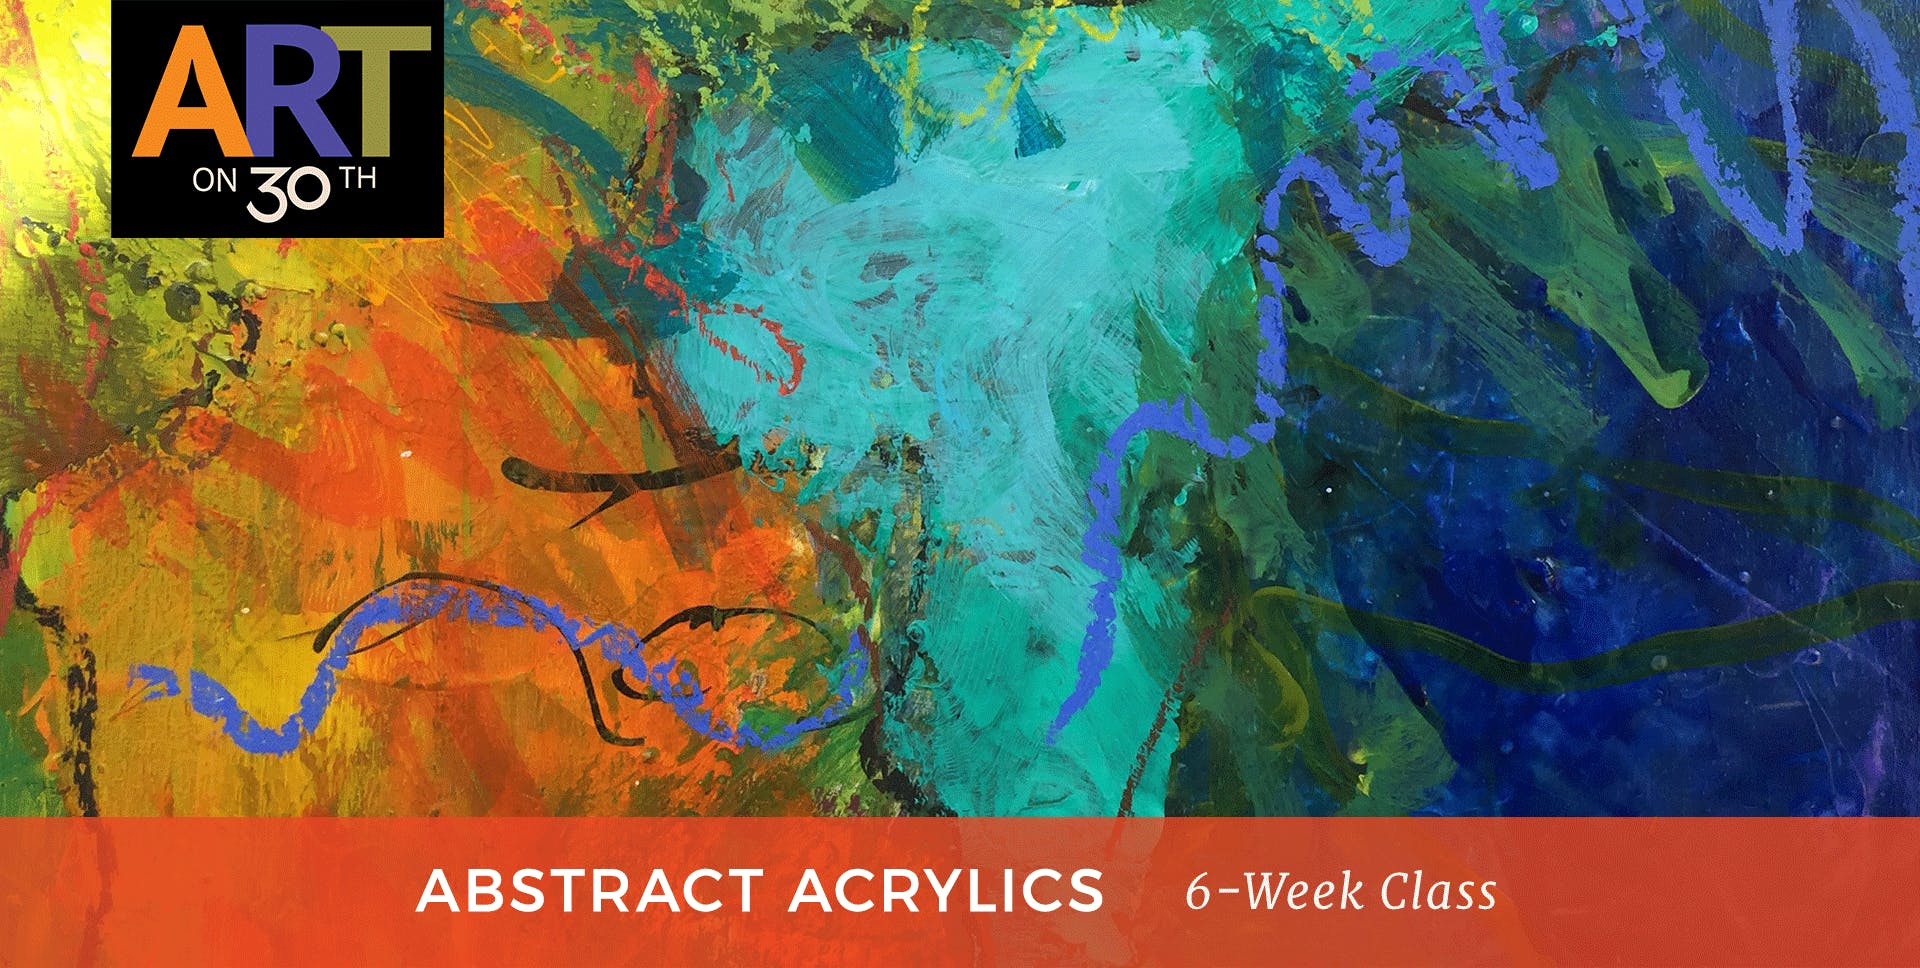 TUE - Abstract Acrylic Painting with instructor Kate Ashton